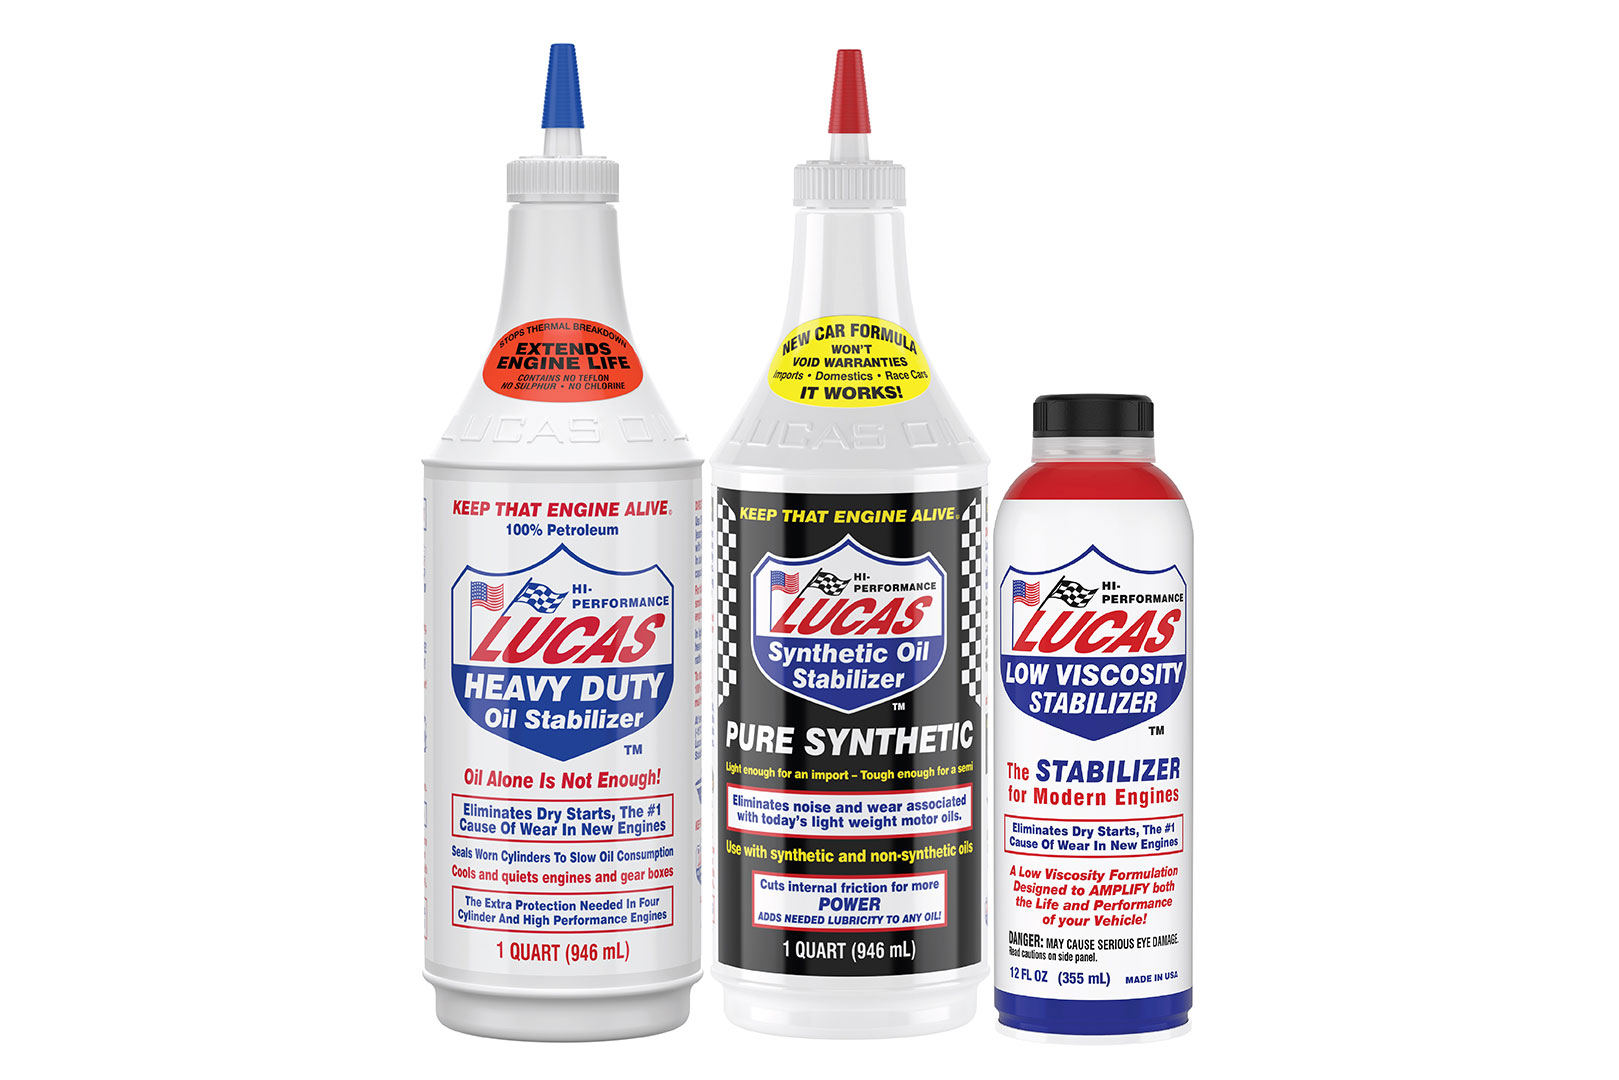 Lucas Oil Stabilizer products